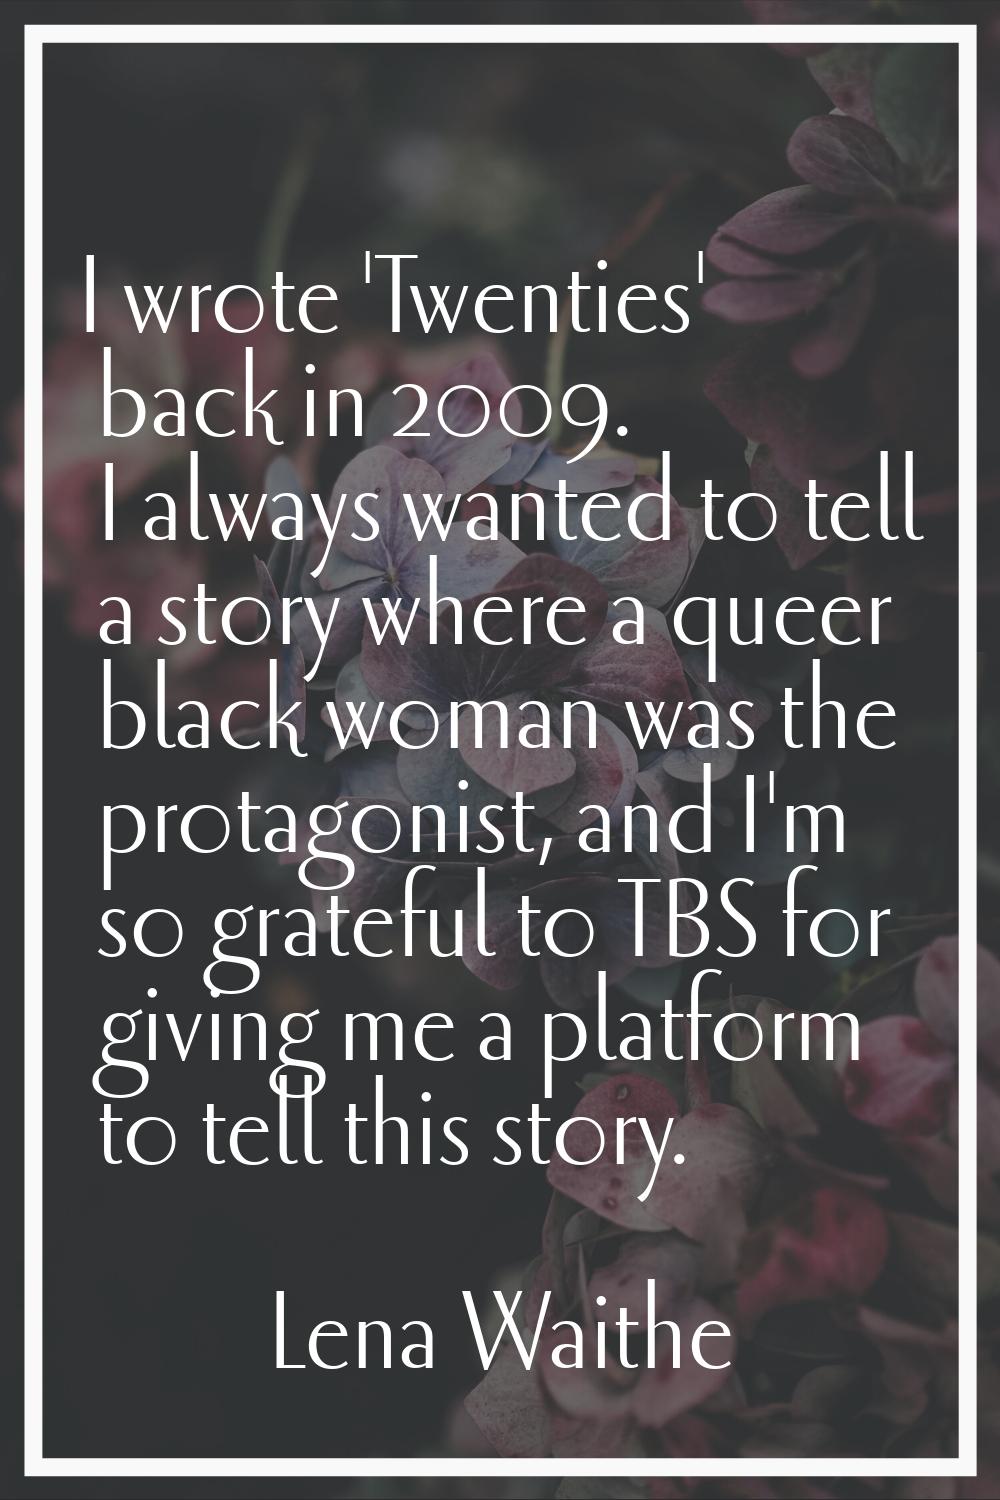 I wrote 'Twenties' back in 2009. I always wanted to tell a story where a queer black woman was the 